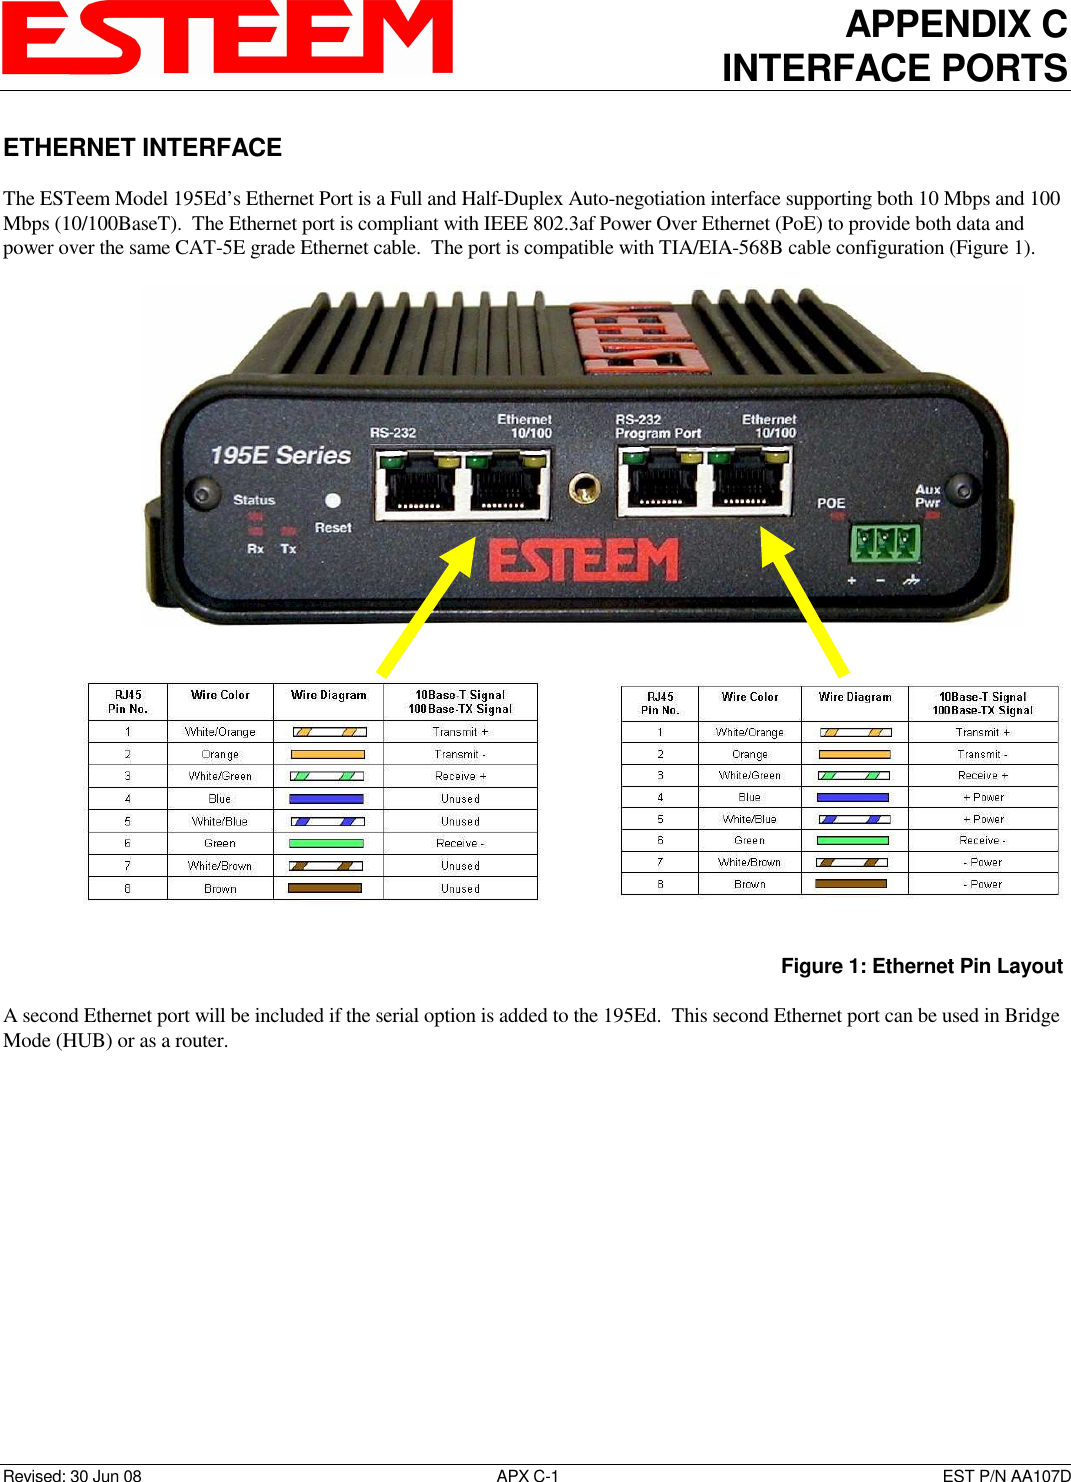 APPENDIX C INTERFACE PORTS   Revised: 30 Jun 08  APX C-1  EST P/N AA107D ETHERNET INTERFACE  The ESTeem Model 195Ed’s Ethernet Port is a Full and Half-Duplex Auto-negotiation interface supporting both 10 Mbps and 100 Mbps (10/100BaseT).  The Ethernet port is compliant with IEEE 802.3af Power Over Ethernet (PoE) to provide both data and power over the same CAT-5E grade Ethernet cable.  The port is compatible with TIA/EIA-568B cable configuration (Figure 1).  A second Ethernet port will be included if the serial option is added to the 195Ed.  This second Ethernet port can be used in Bridge Mode (HUB) or as a router.  Figure 1: Ethernet Pin Layout   